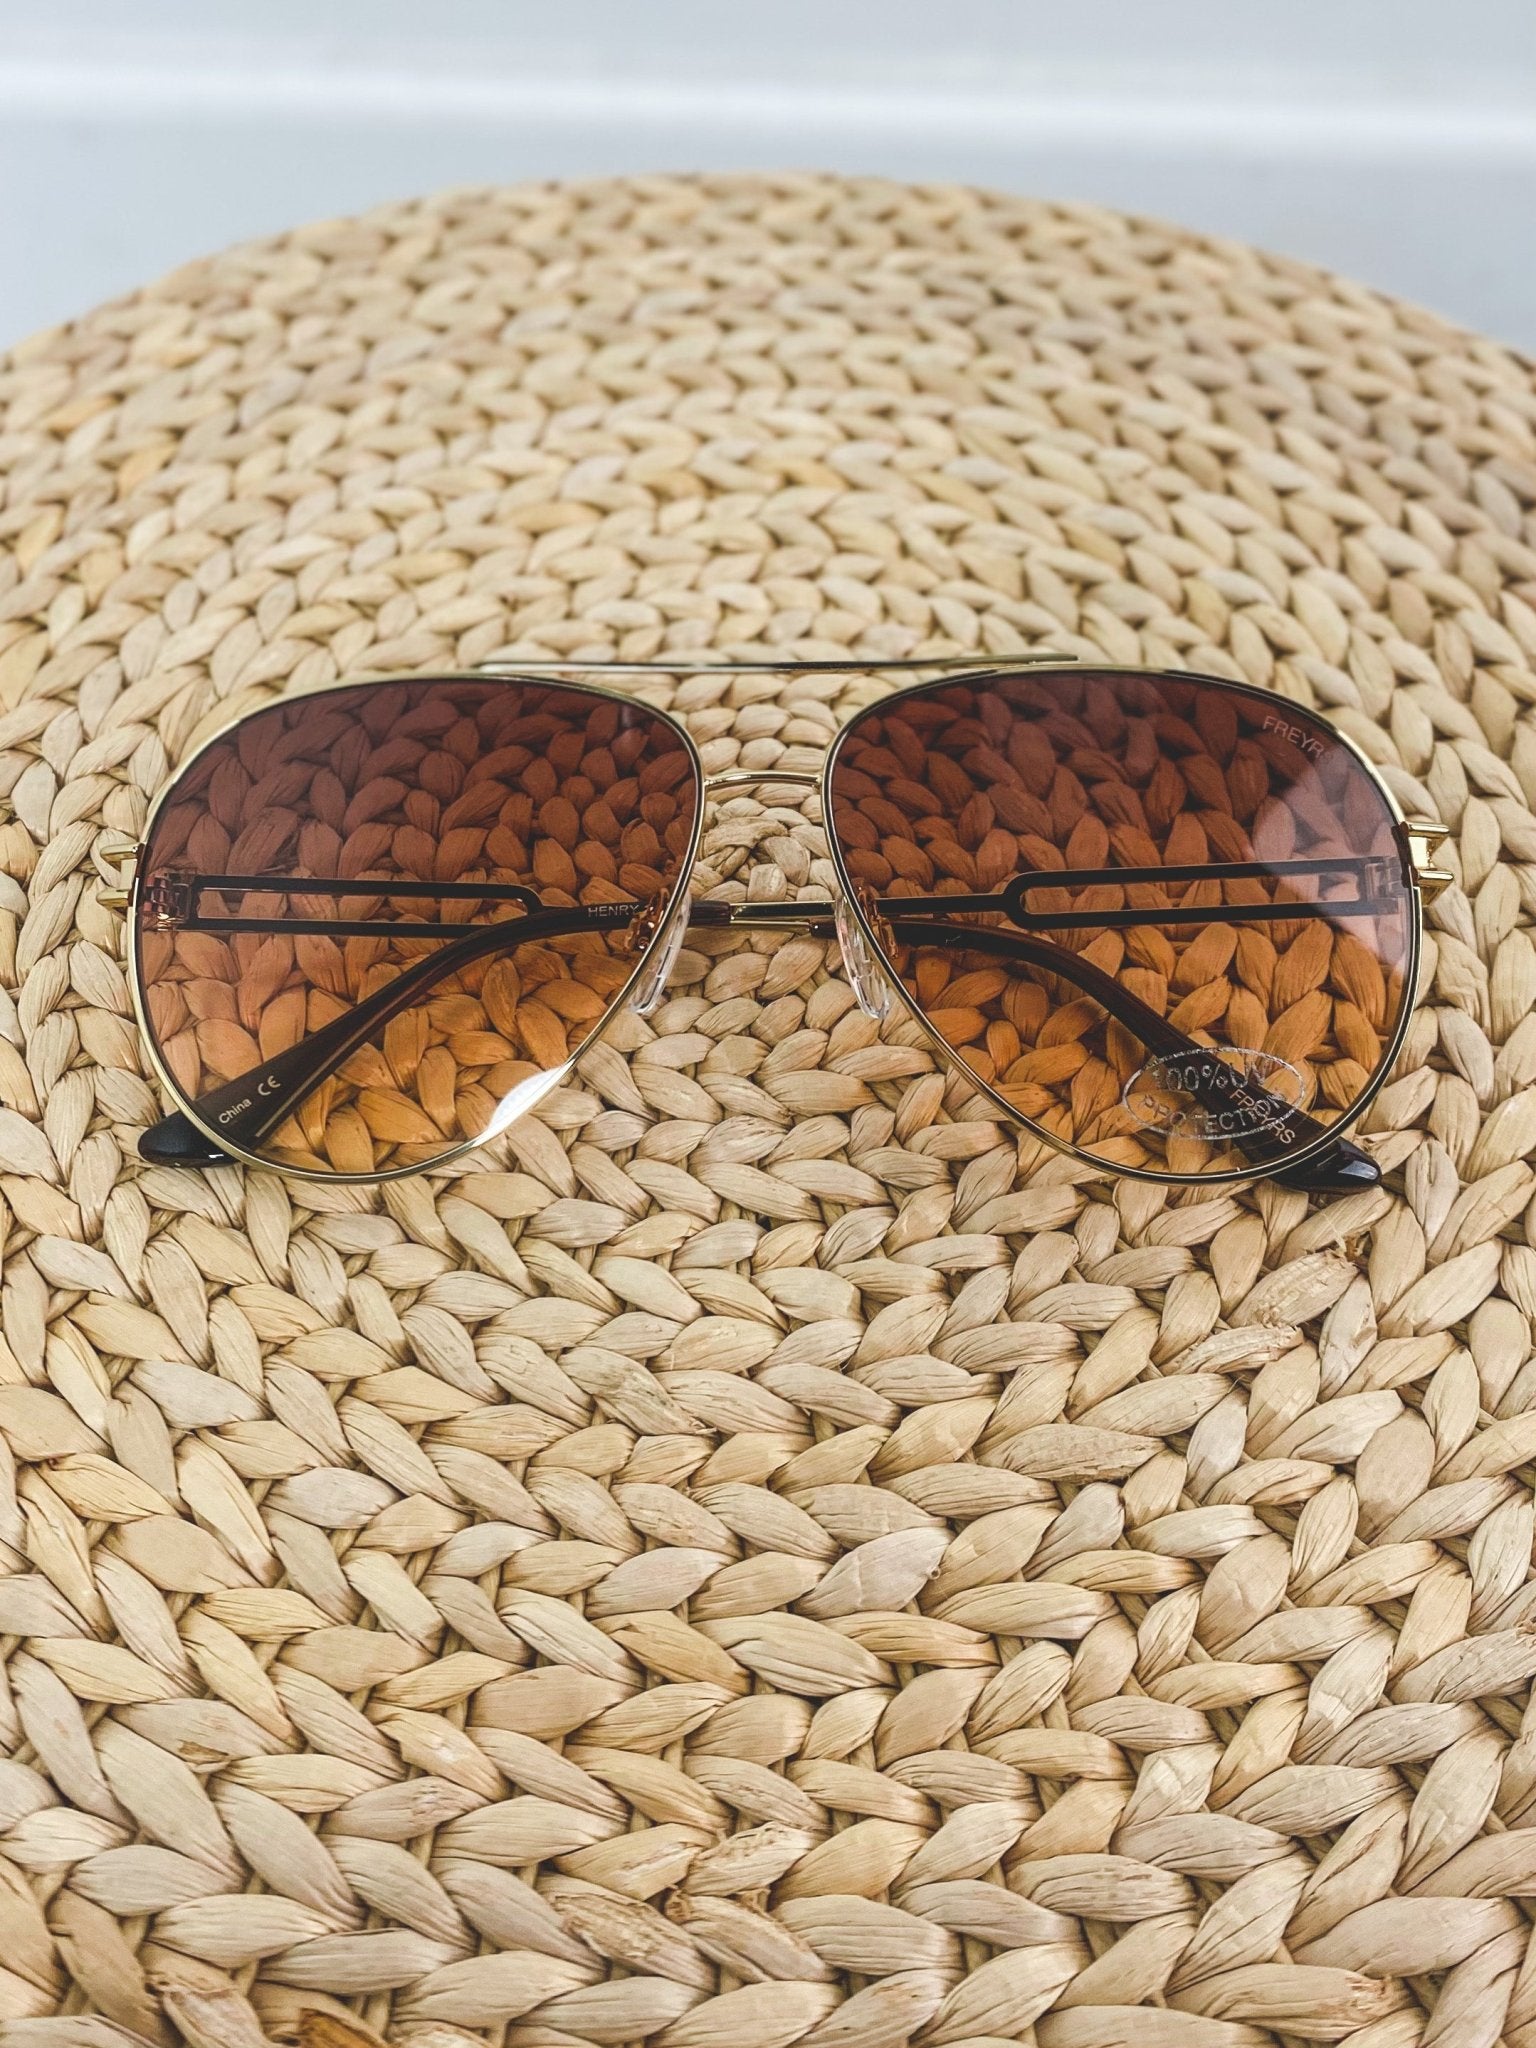 Freyrs Henry sunglasses gold/brown - Cute Sunglasses - Fun Wayfarers at Lush Fashion Lounge Boutique in Oklahoma